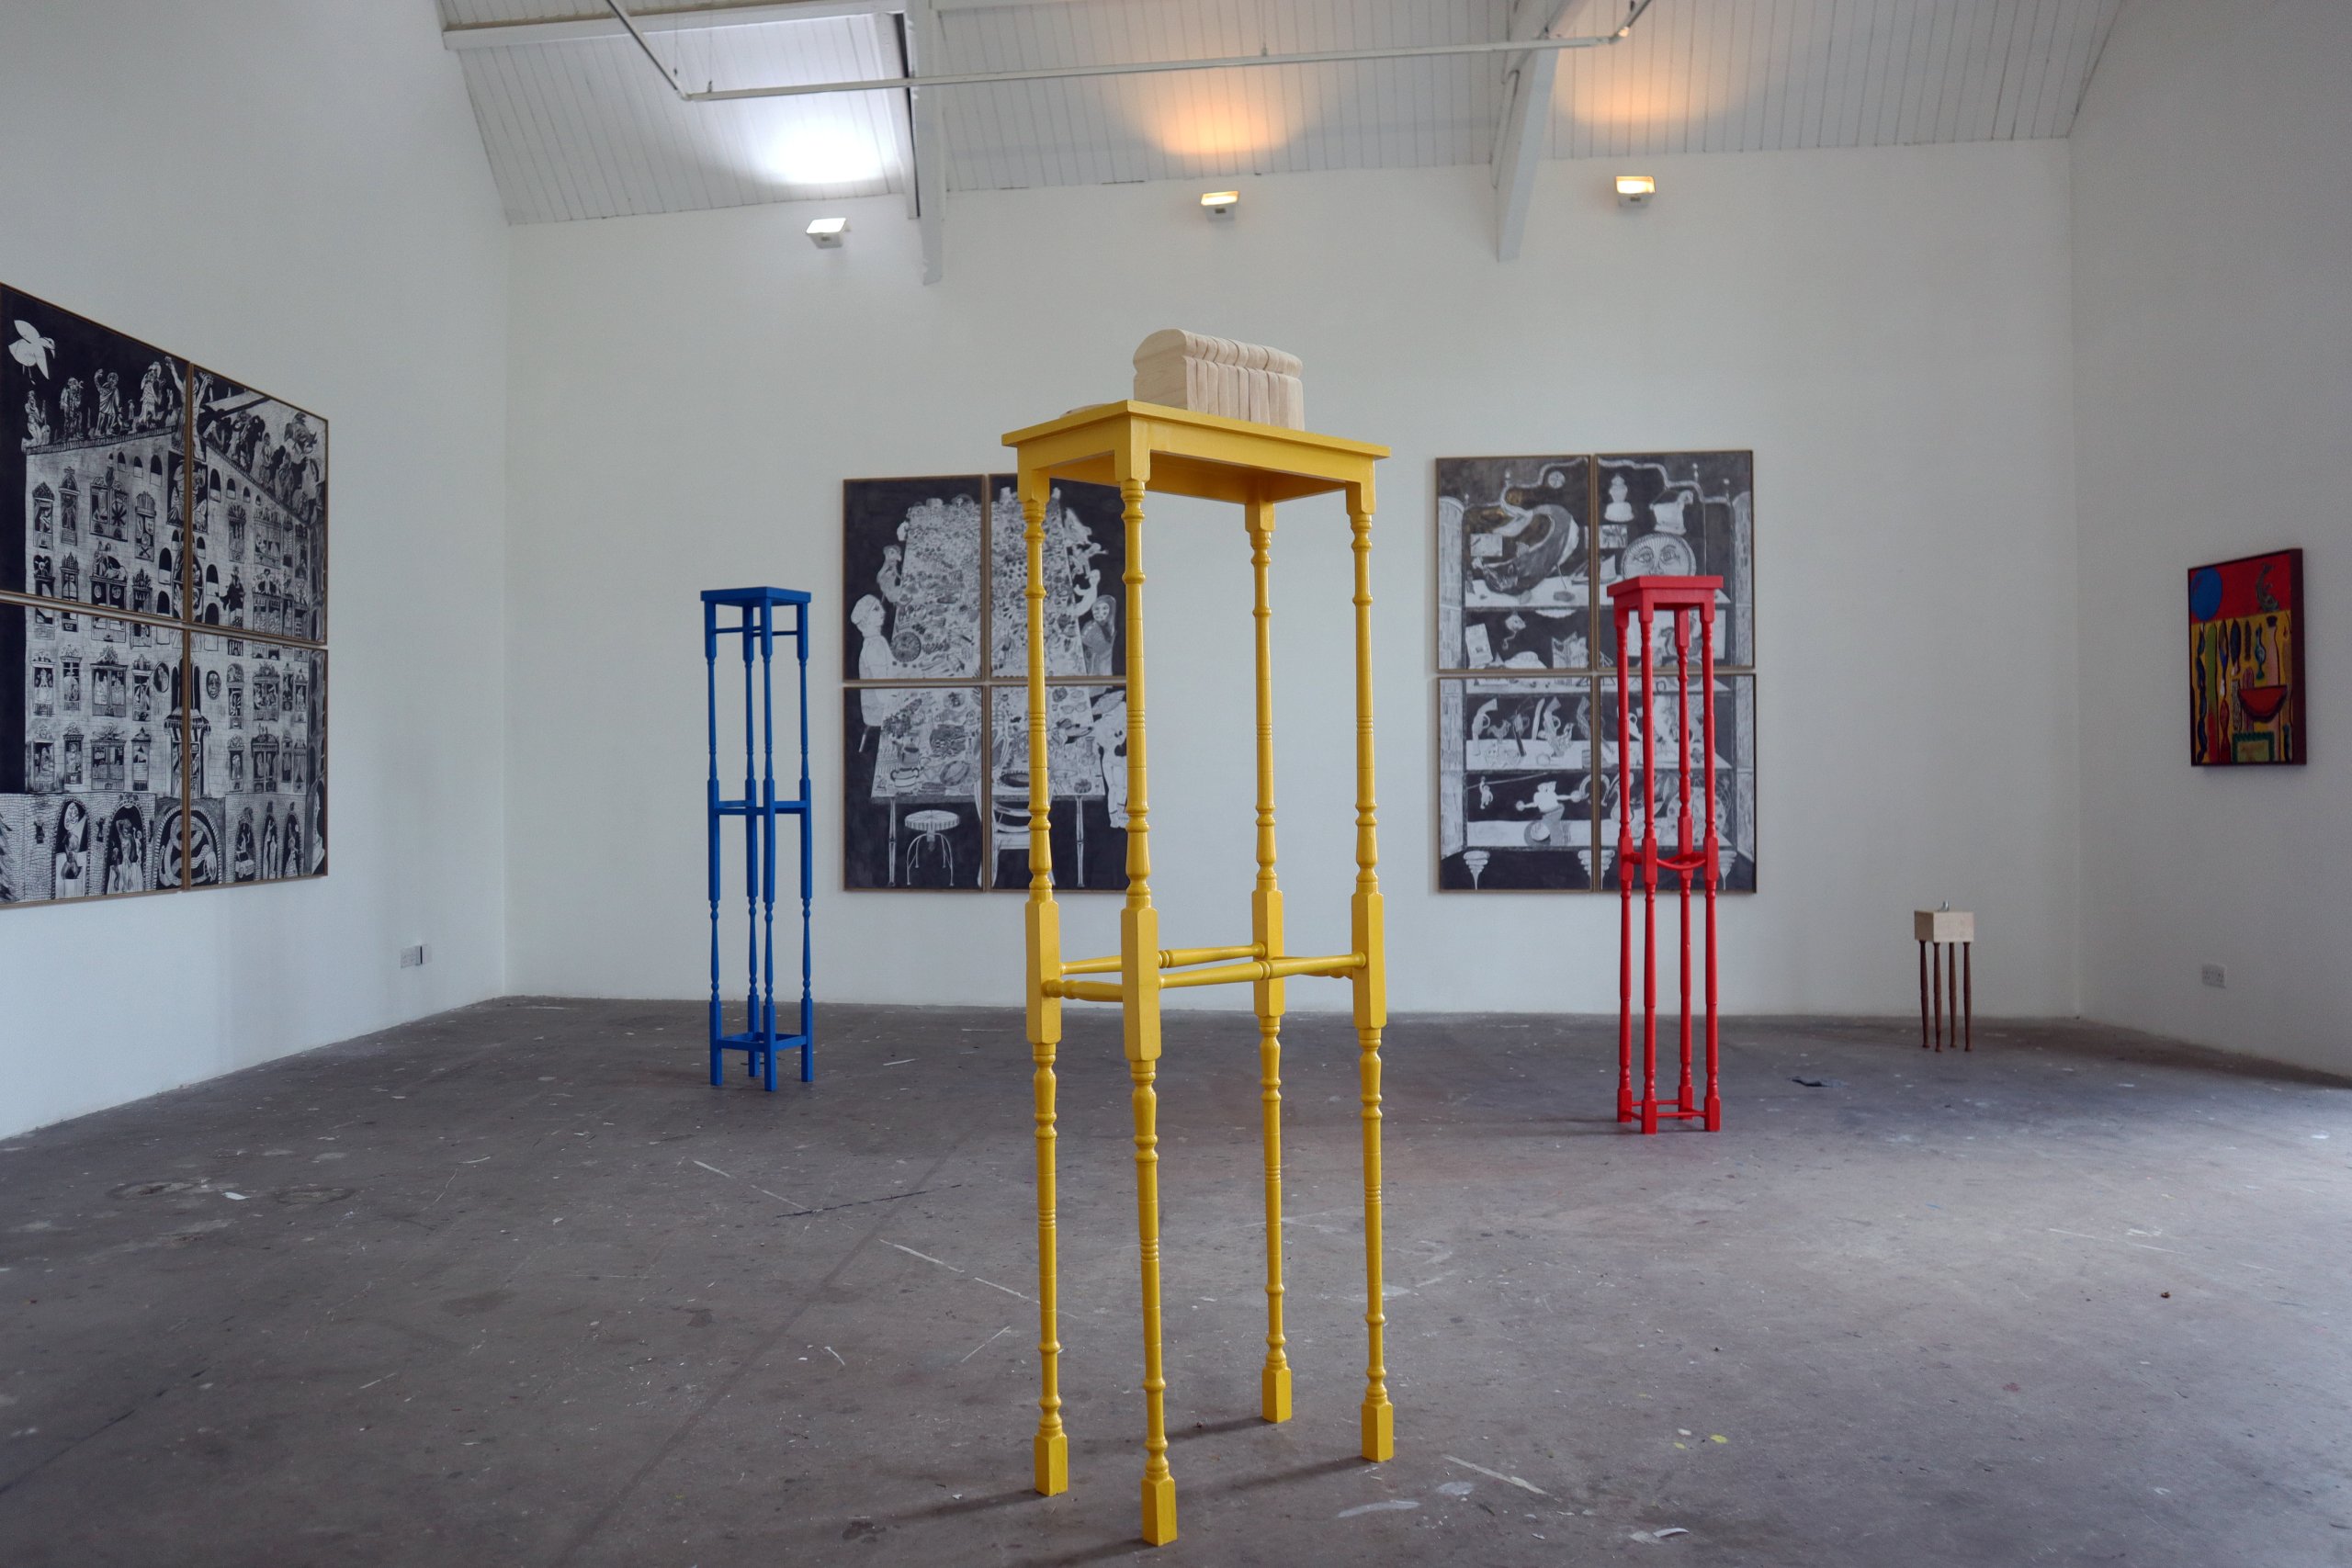 Rufus Newell; Tall Tables at Patrick Studios. Three sculptural forms, yellow blue and red alike side tables but with extended legs stand in a large space with other works on the walls surrounding